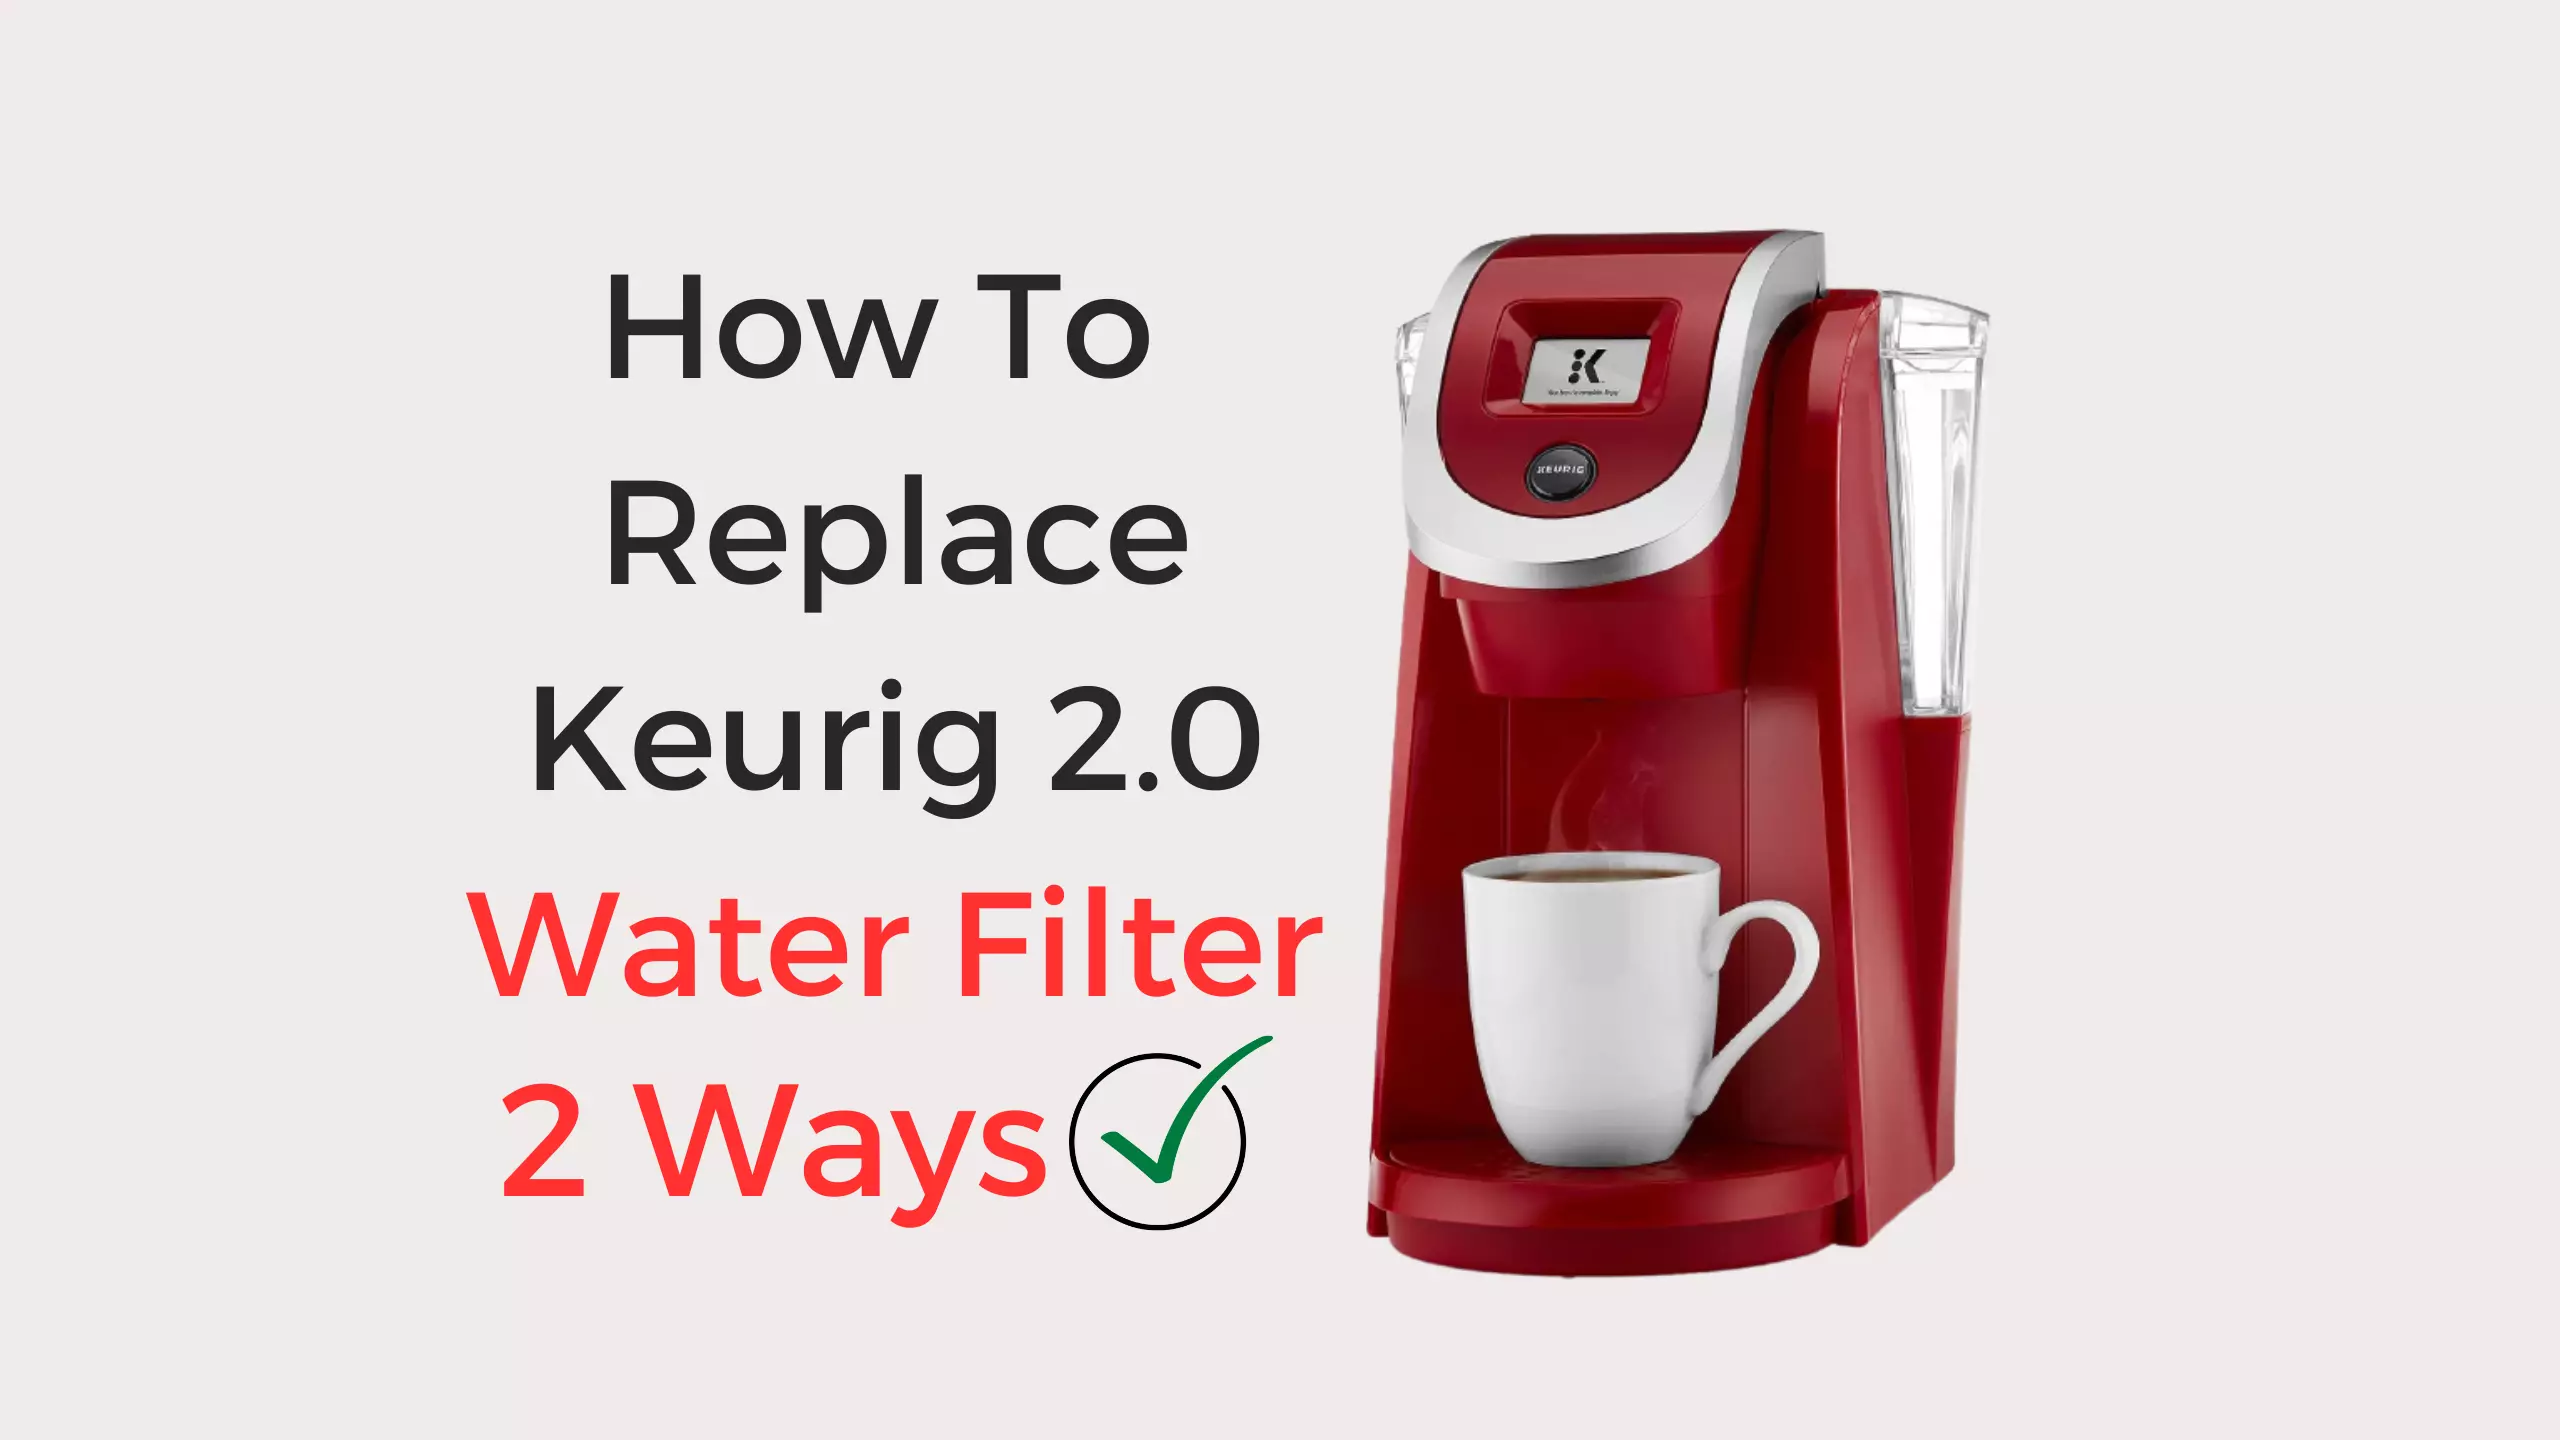 how to replace keurig 2.0 water filter